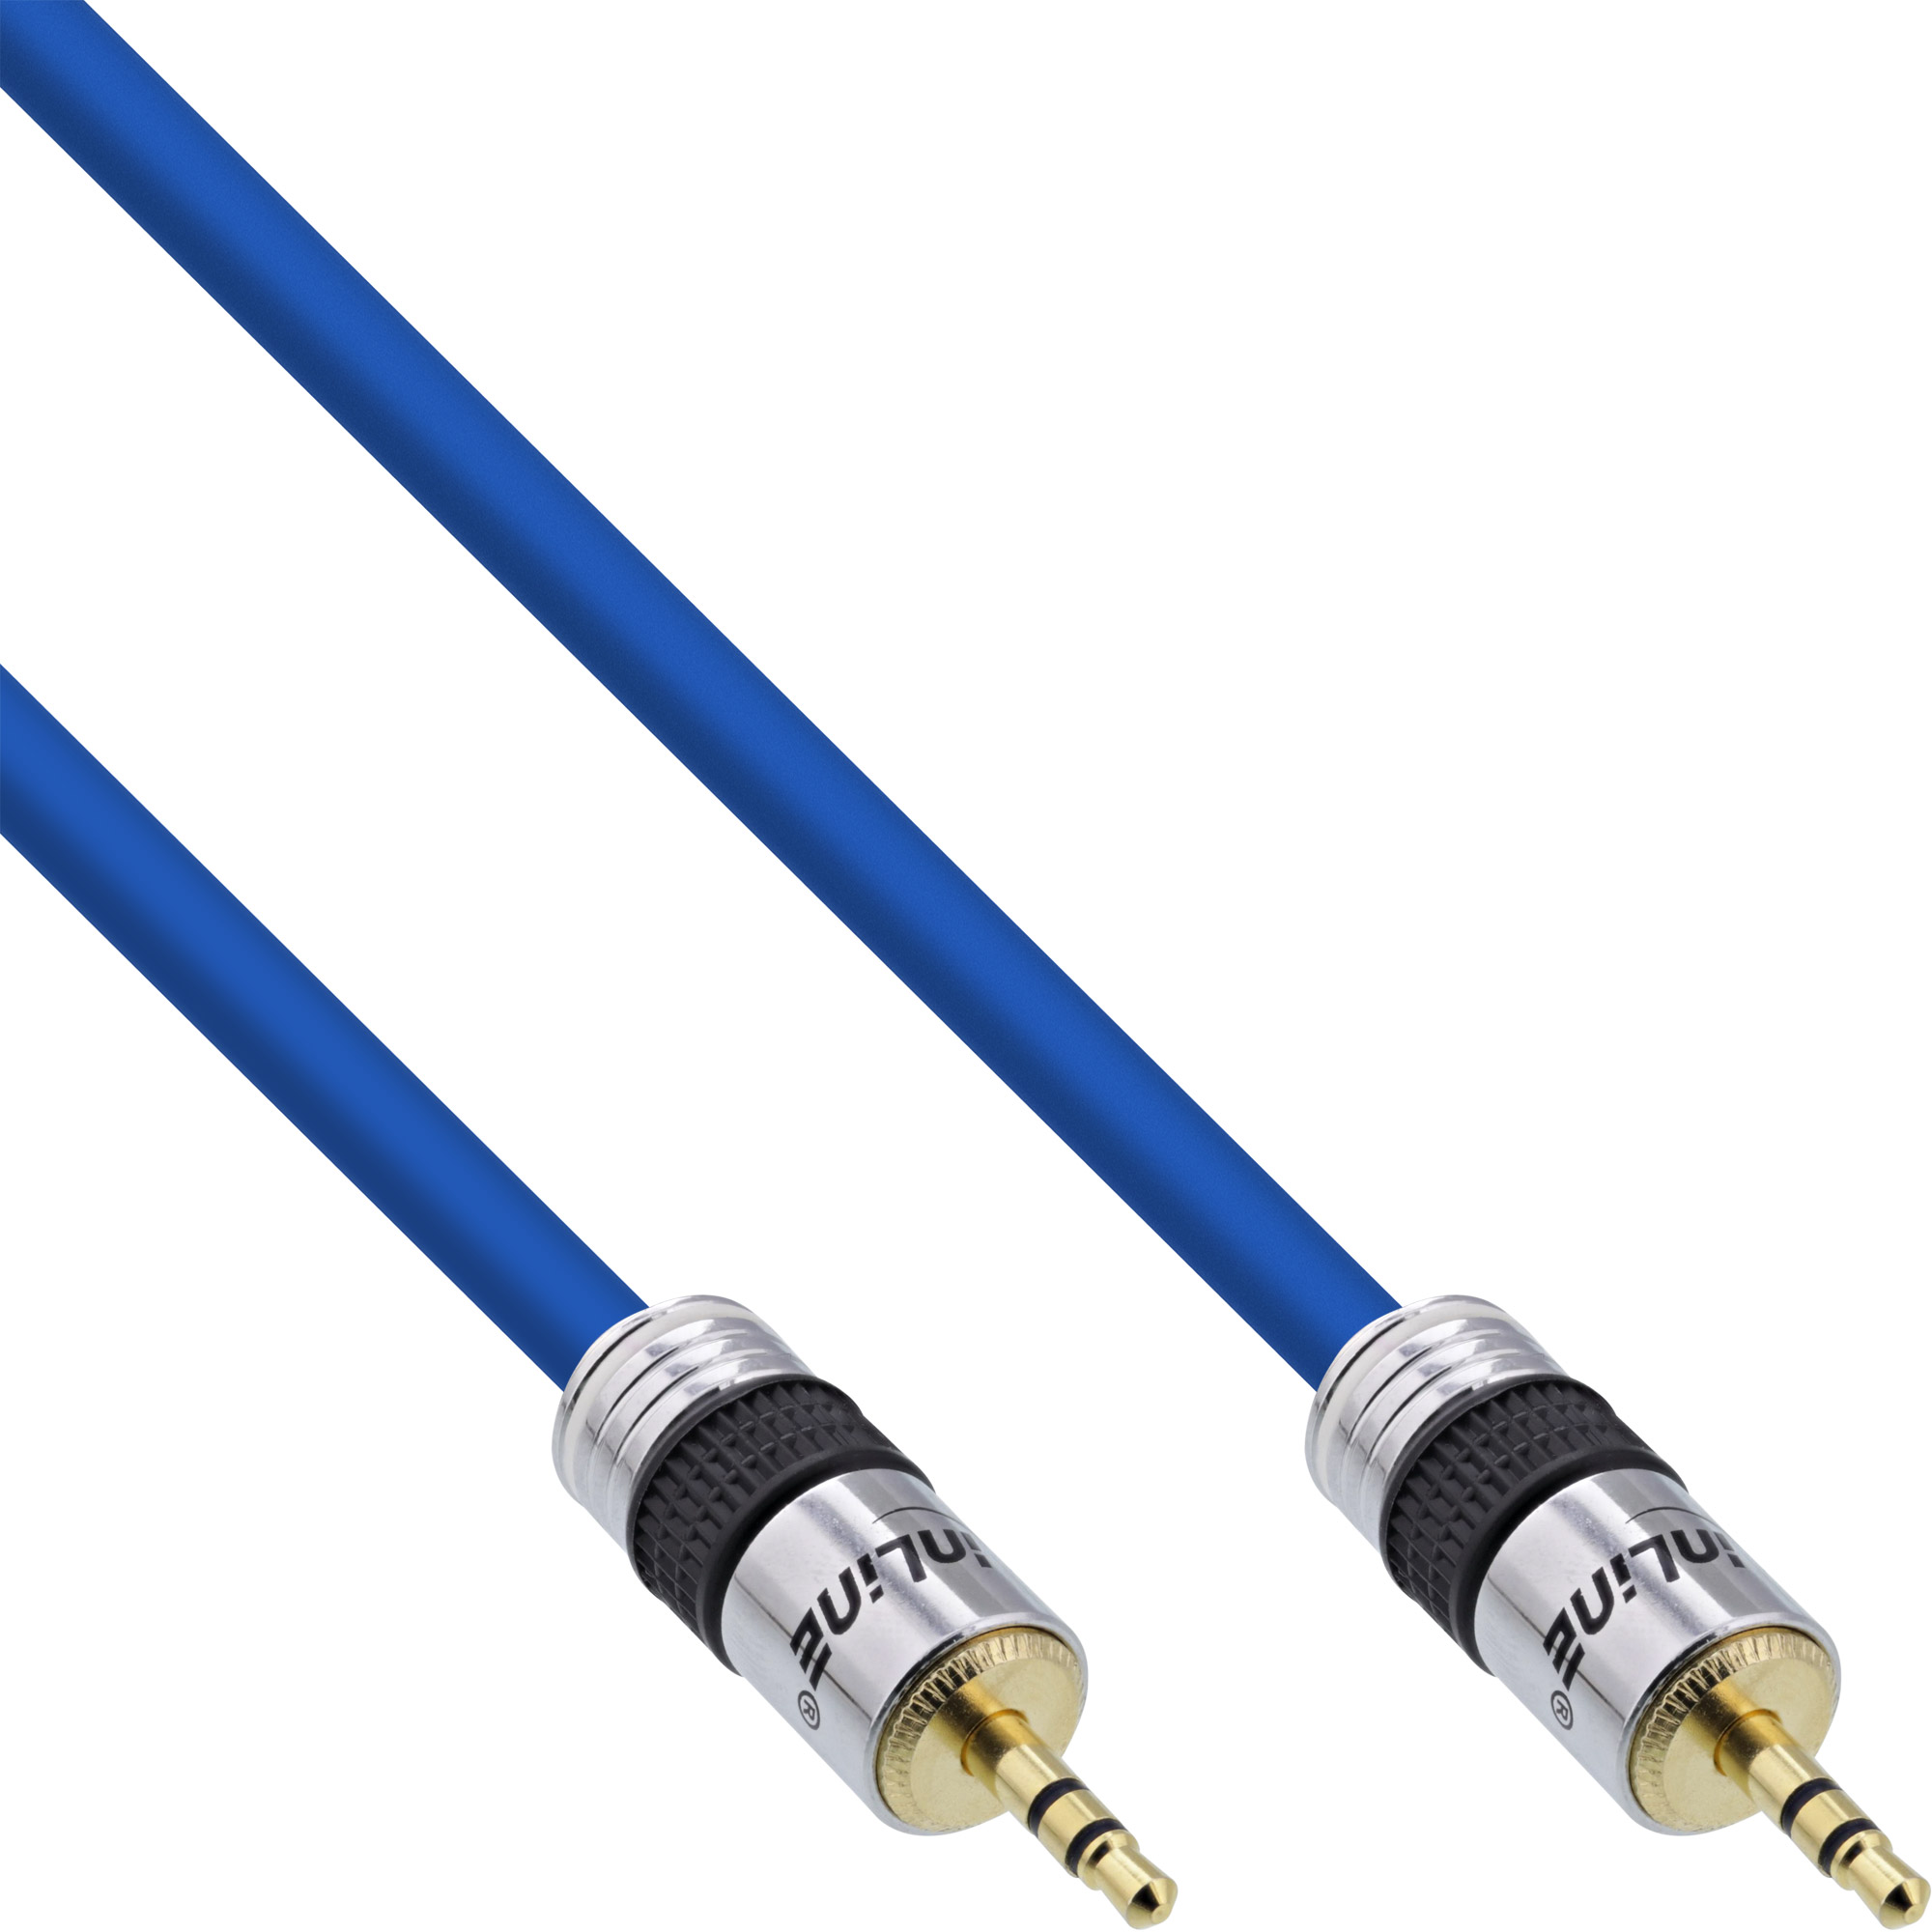 Stereo jack Pro 3.5 mm, 2 m